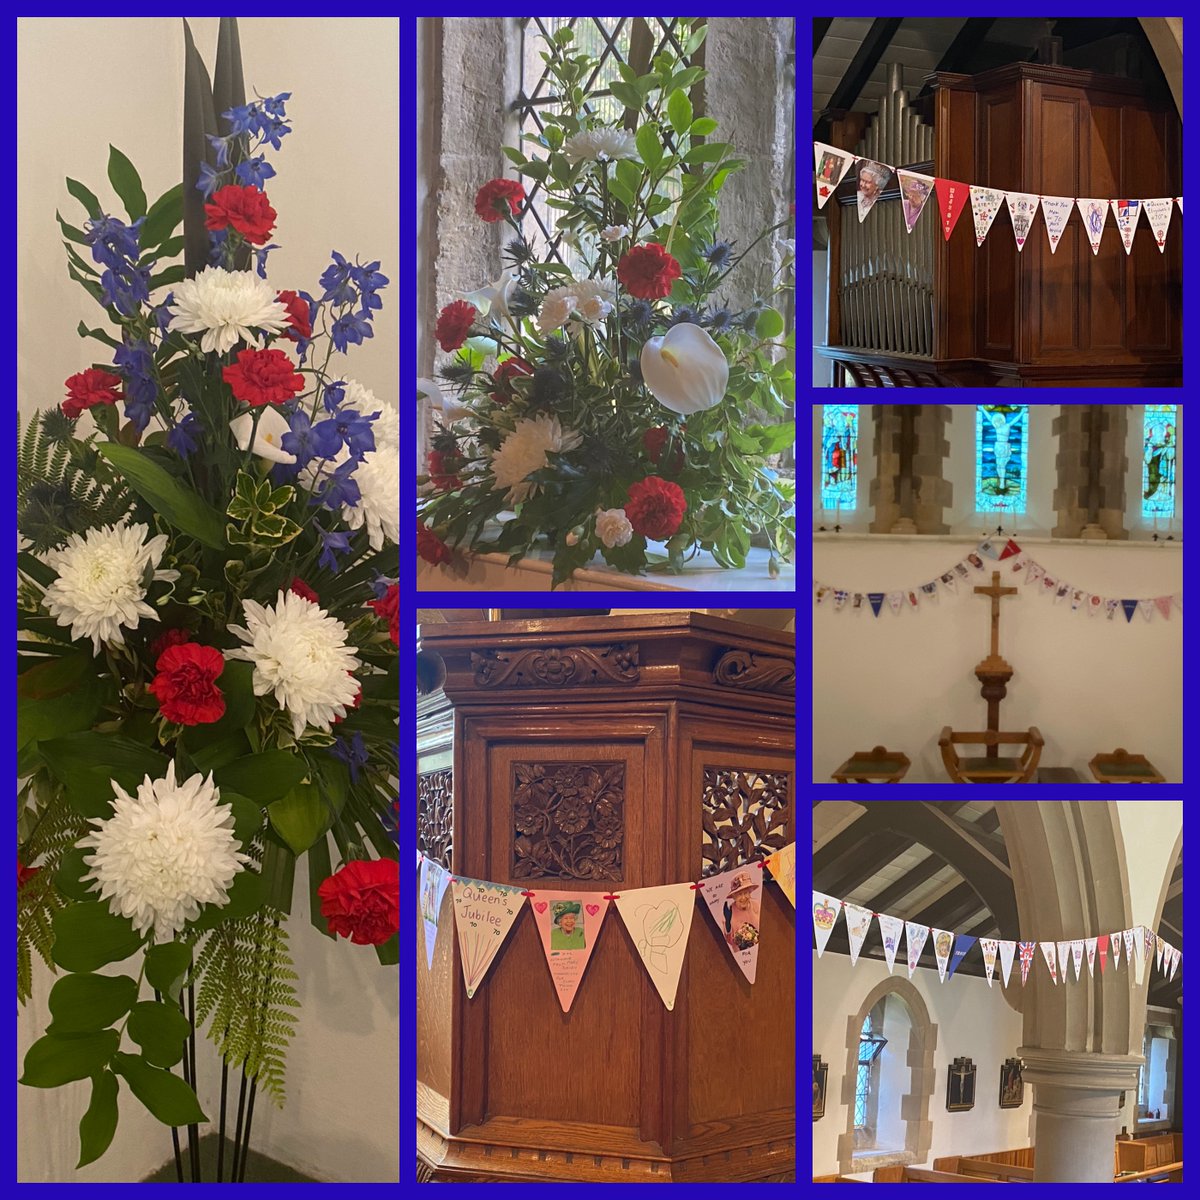 Come along to @stmarysep @ChichesterDio today, Sun 5 June to celebrate #Pentecost & the #PlatinumJubilee Services at 8am & 10am, & a service of thanksgiving for Queen Elizabeth II at 6pm.  There's a special outdoor service at 3pm as part of @godsacre #ChurchesCountonNature